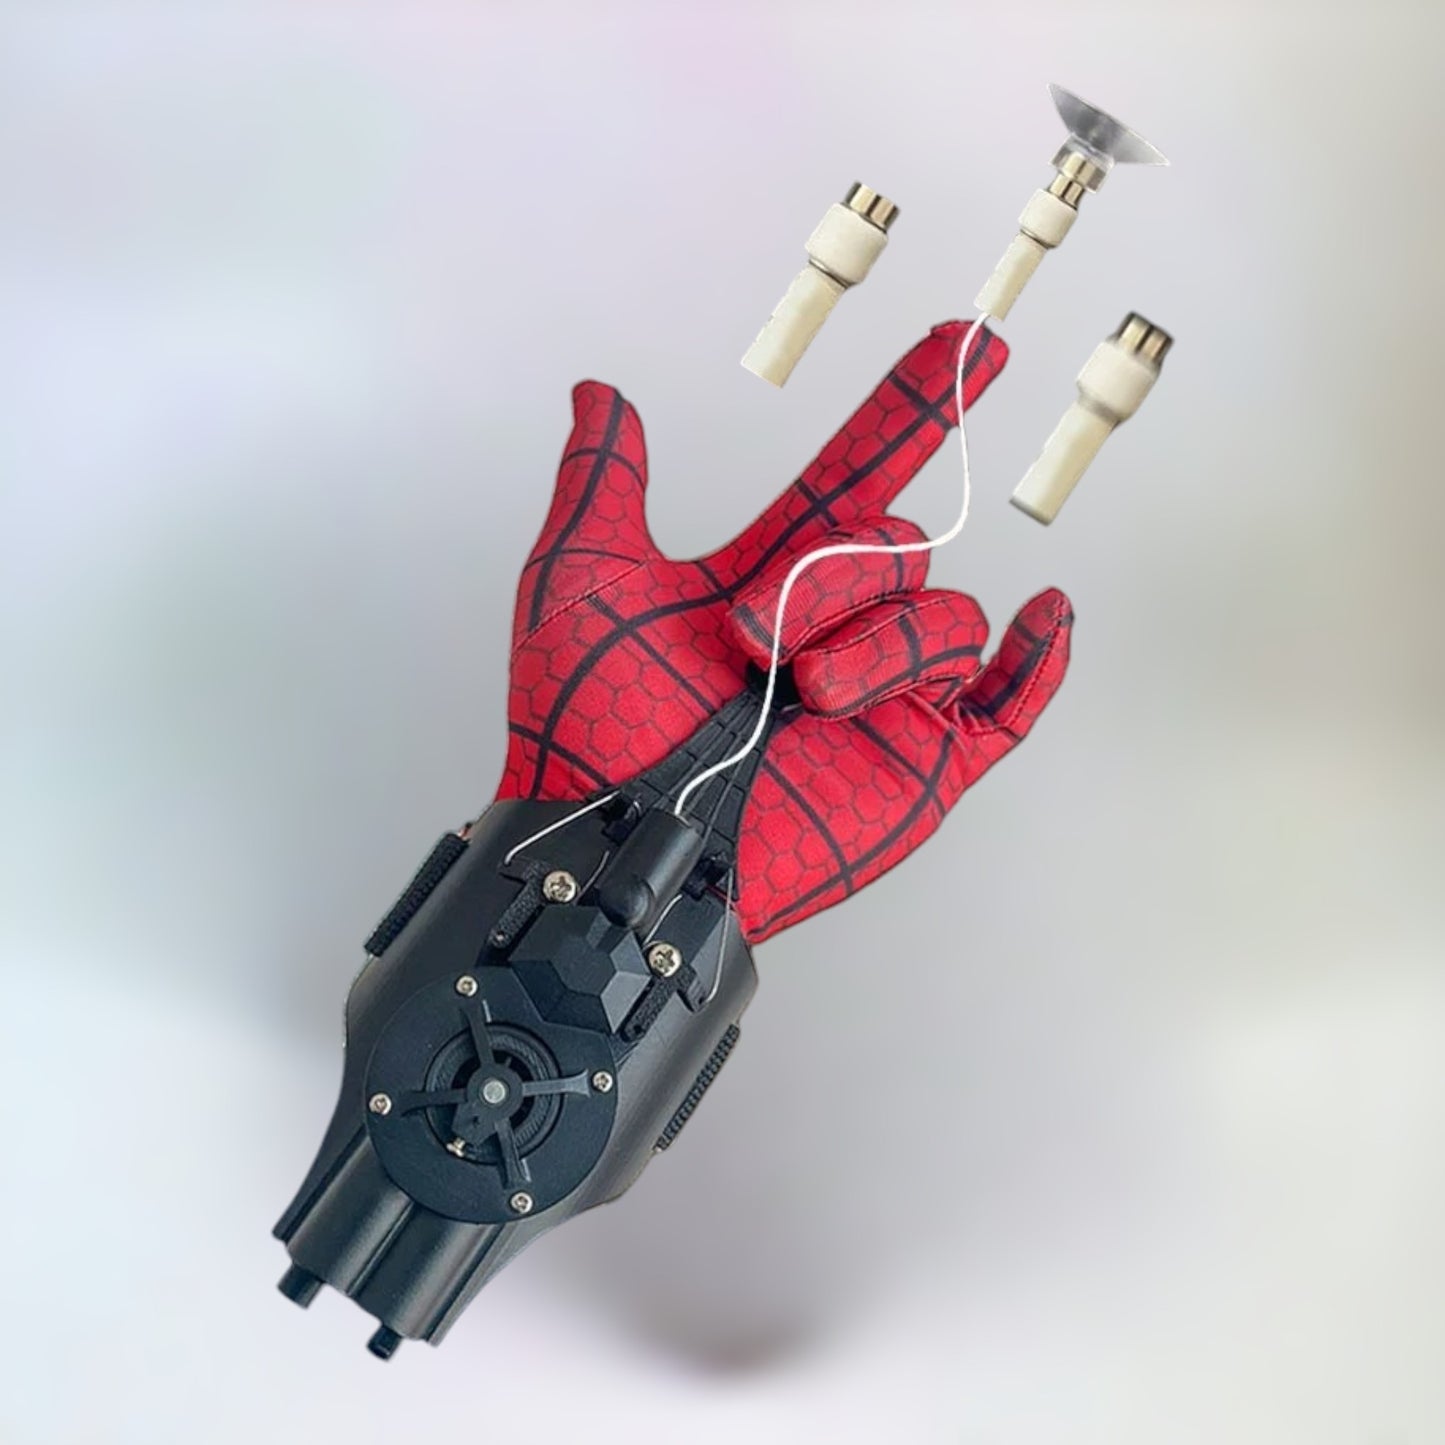 Spider-Man web shooter in black with an included red Spider-Man glove displayed on a plain white background.